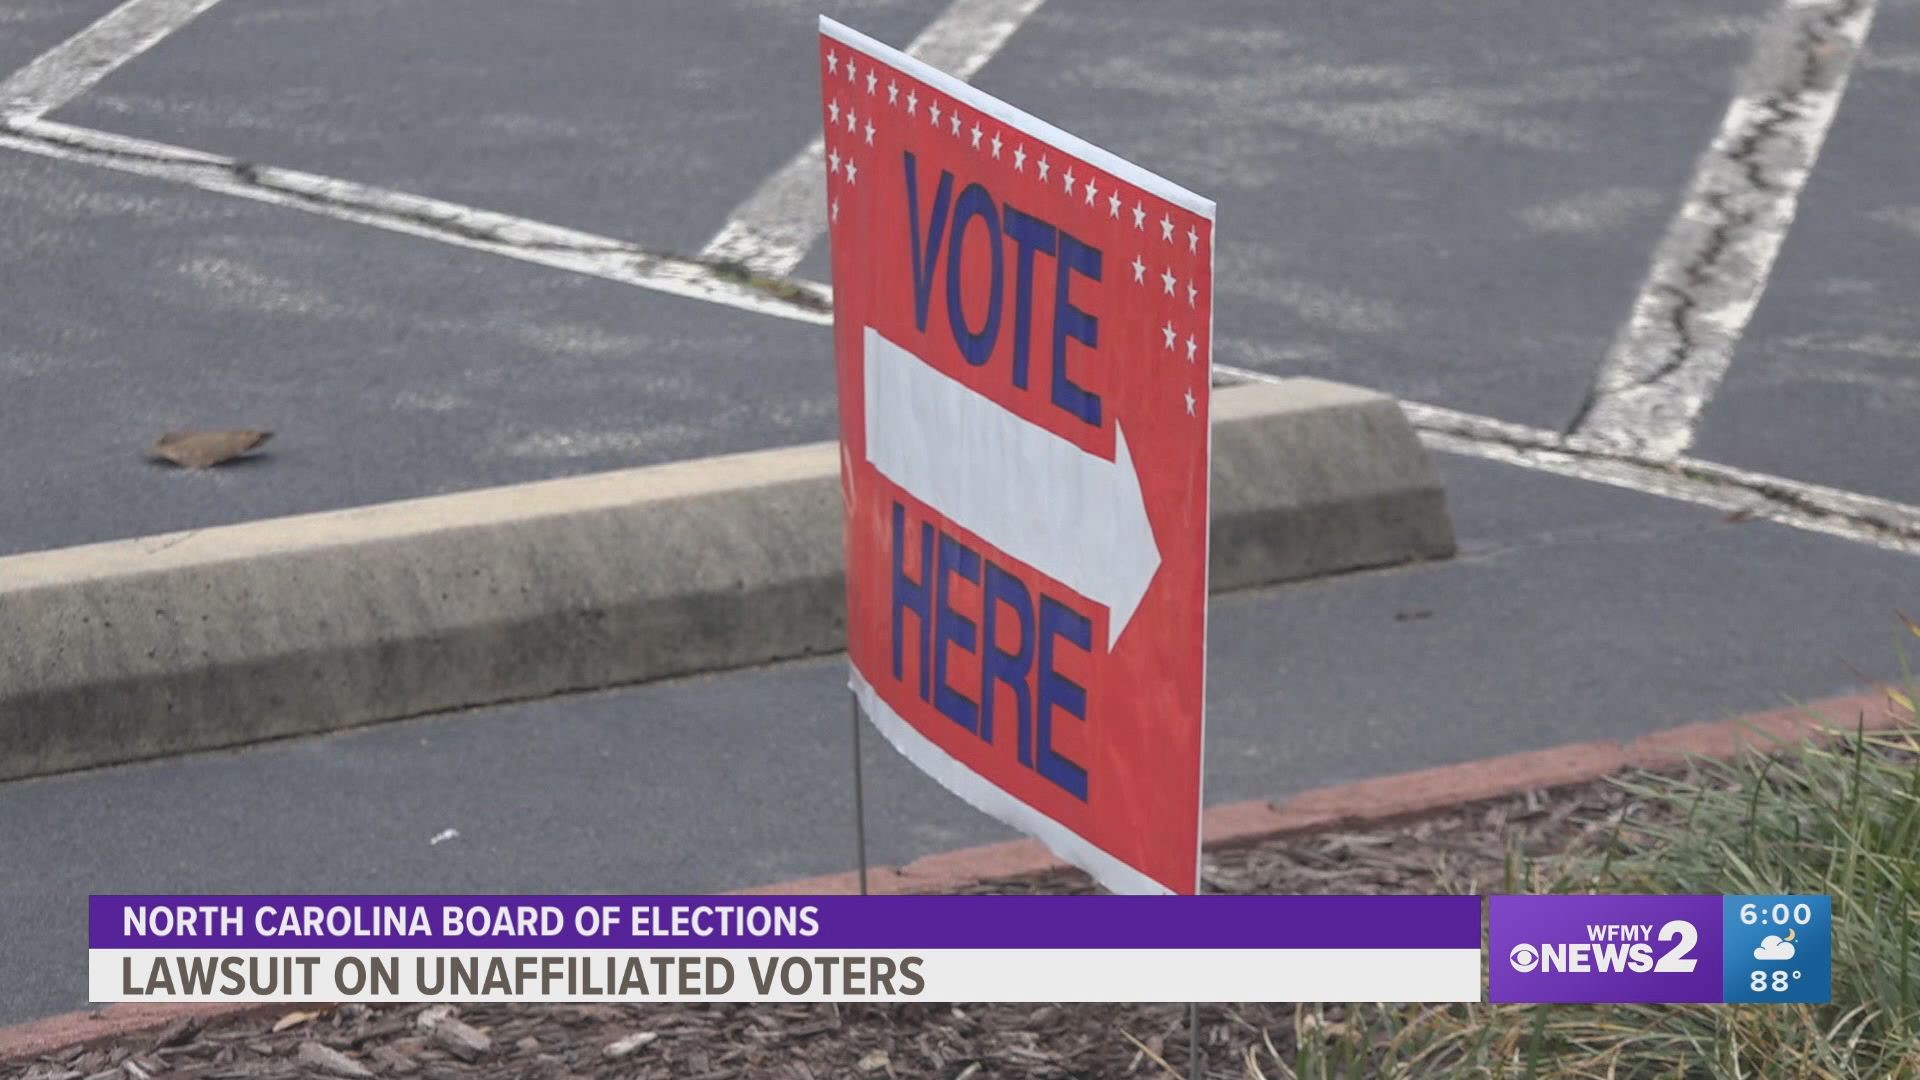 Unaffiliated voters claim they’re the largest group of voters in North Carolina and that they deserve a seat on the board of elections.